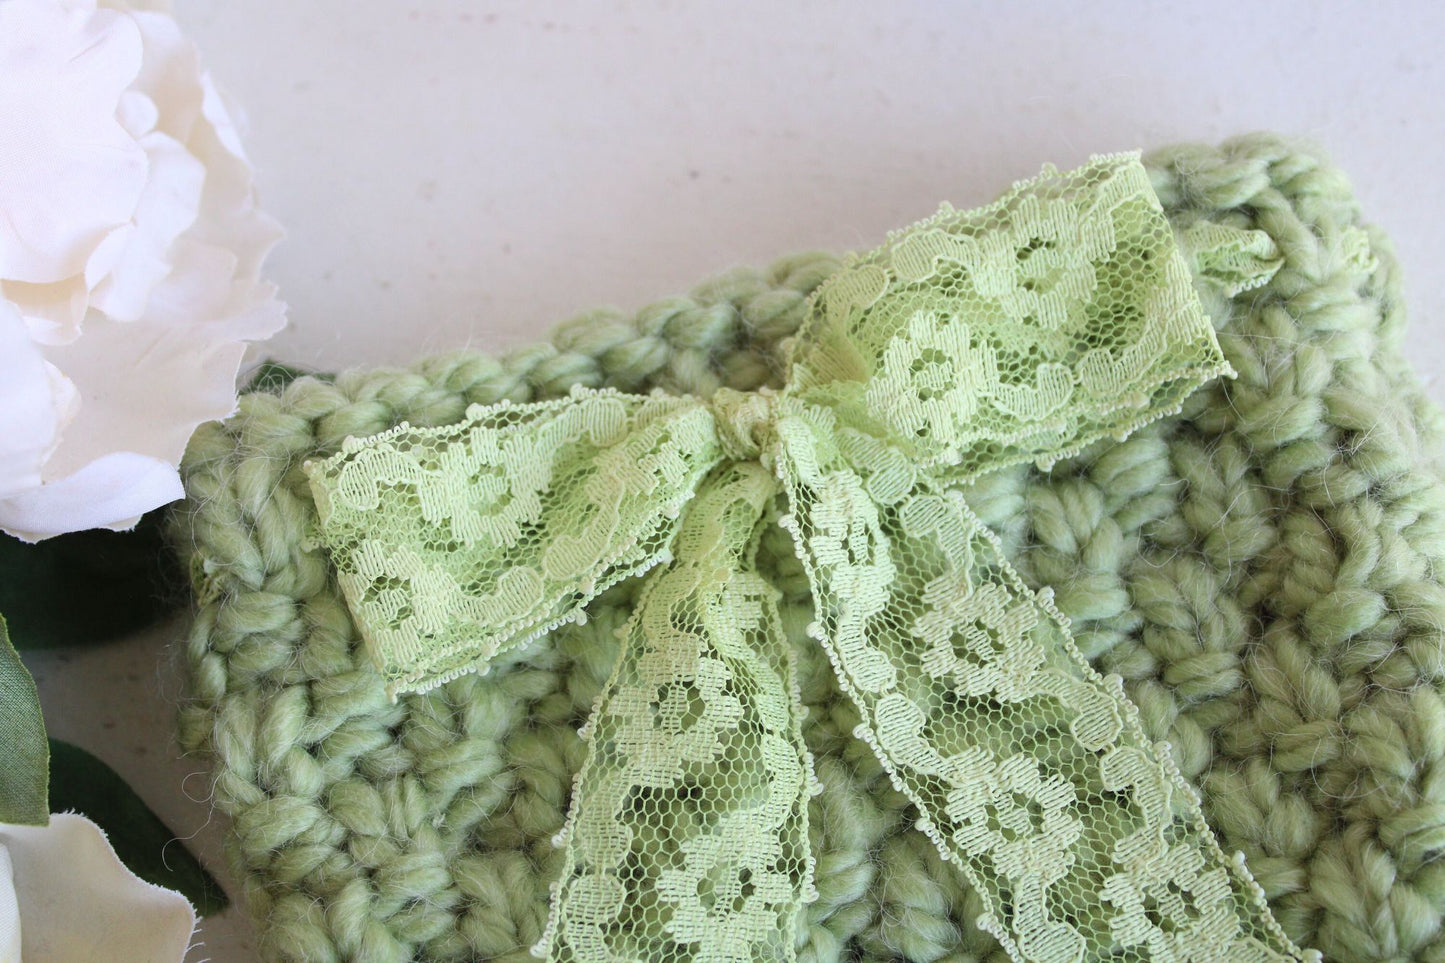 The Psion Apple Hand Knit Book Pouch or Cover in Chunky Pale Green Yarn